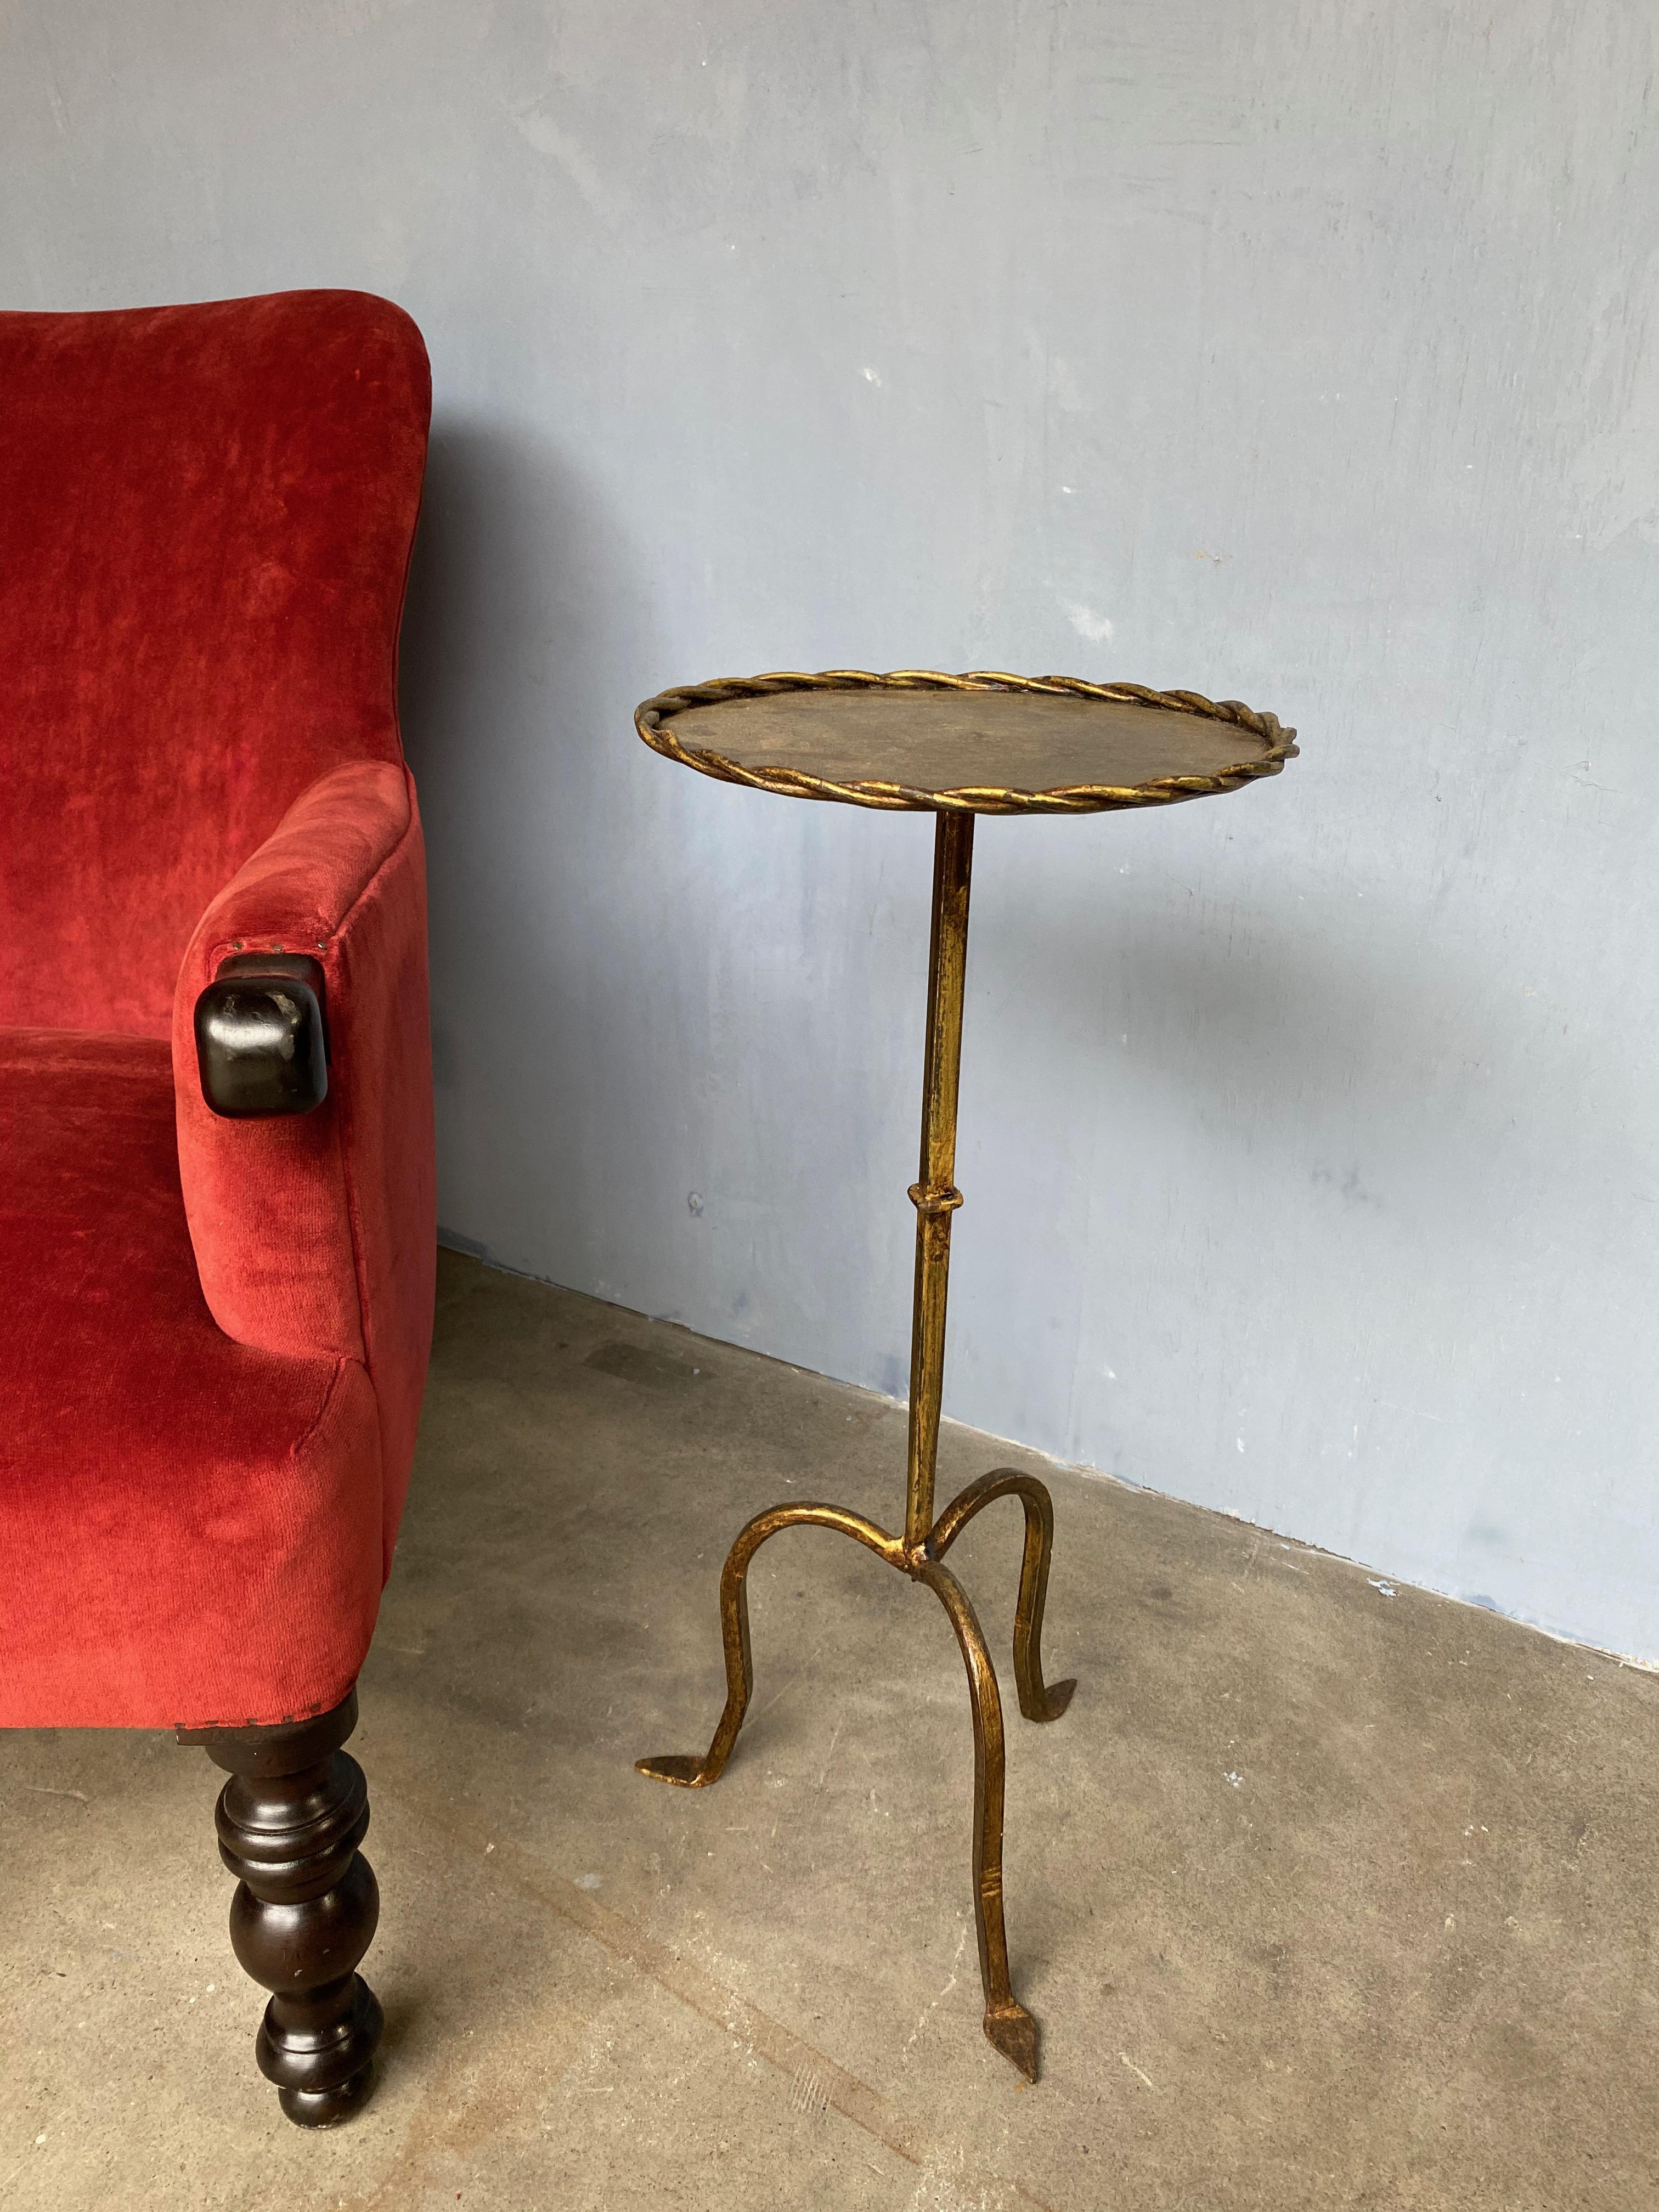 A small drink table on a tripod base that will work perfectly as an end table that can be moved around as needed. The table has the original hand applied gold finish with darker undertones, creating a rich and unique finish. The top surface in